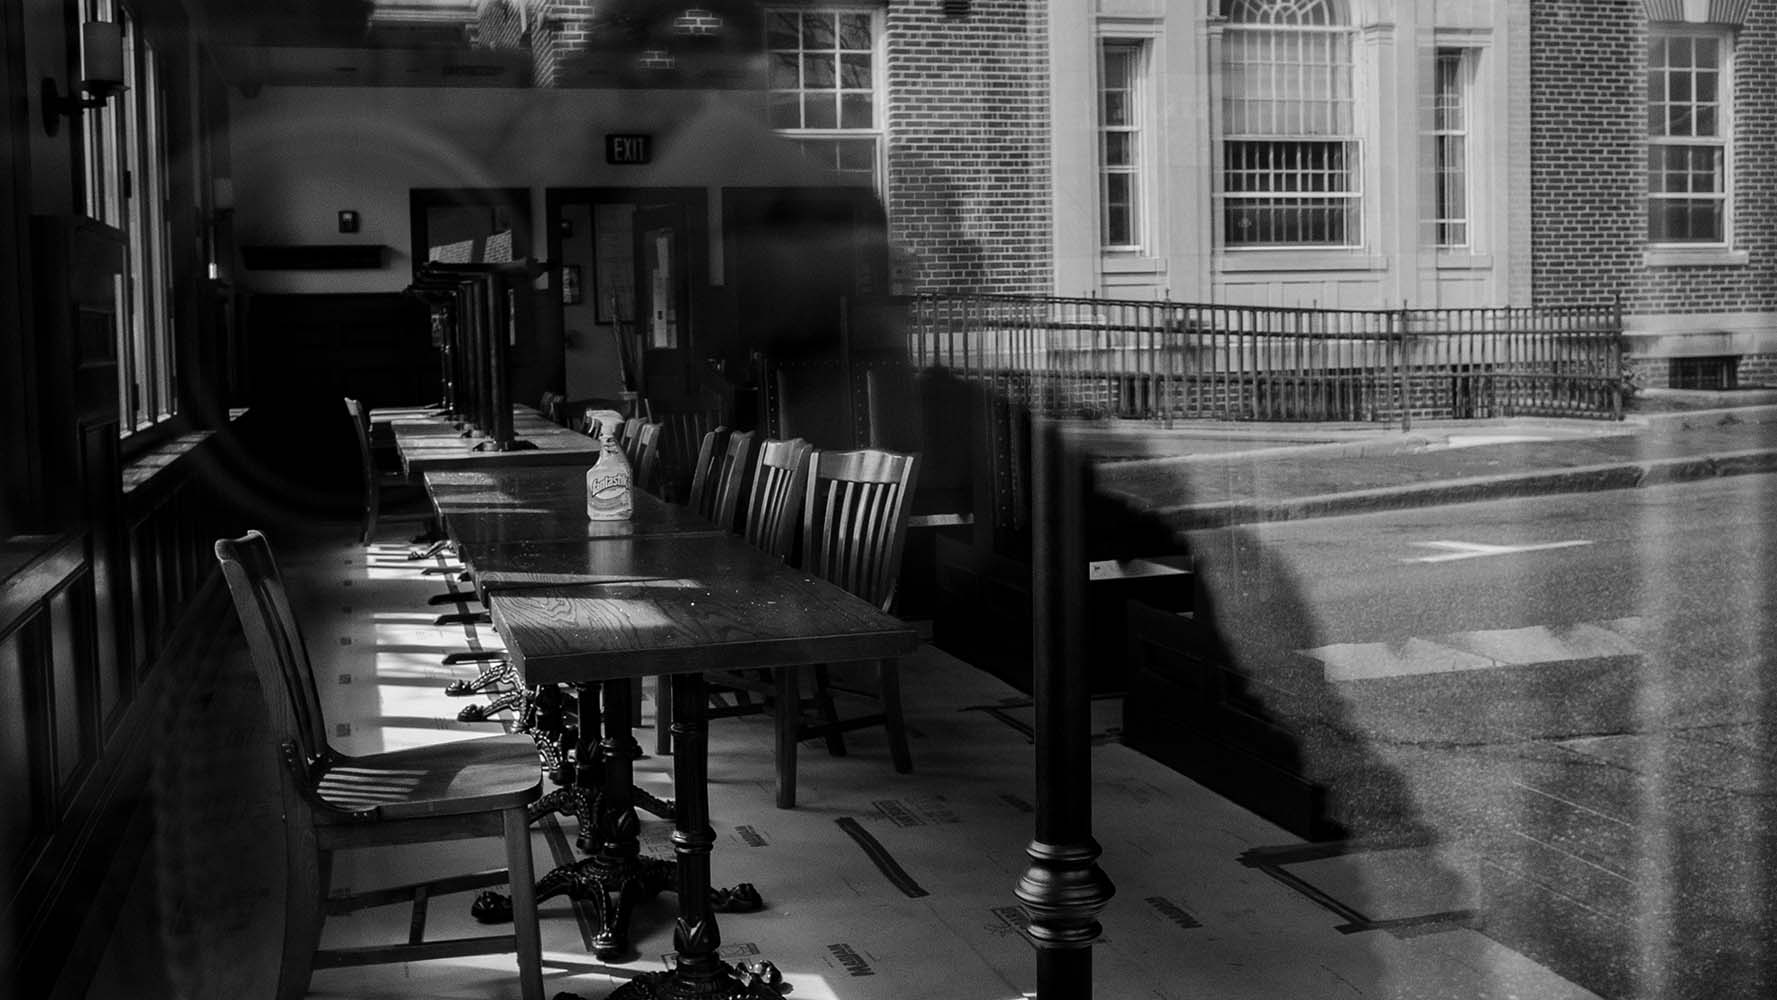 reflections in empty restaurant widnow in black and white